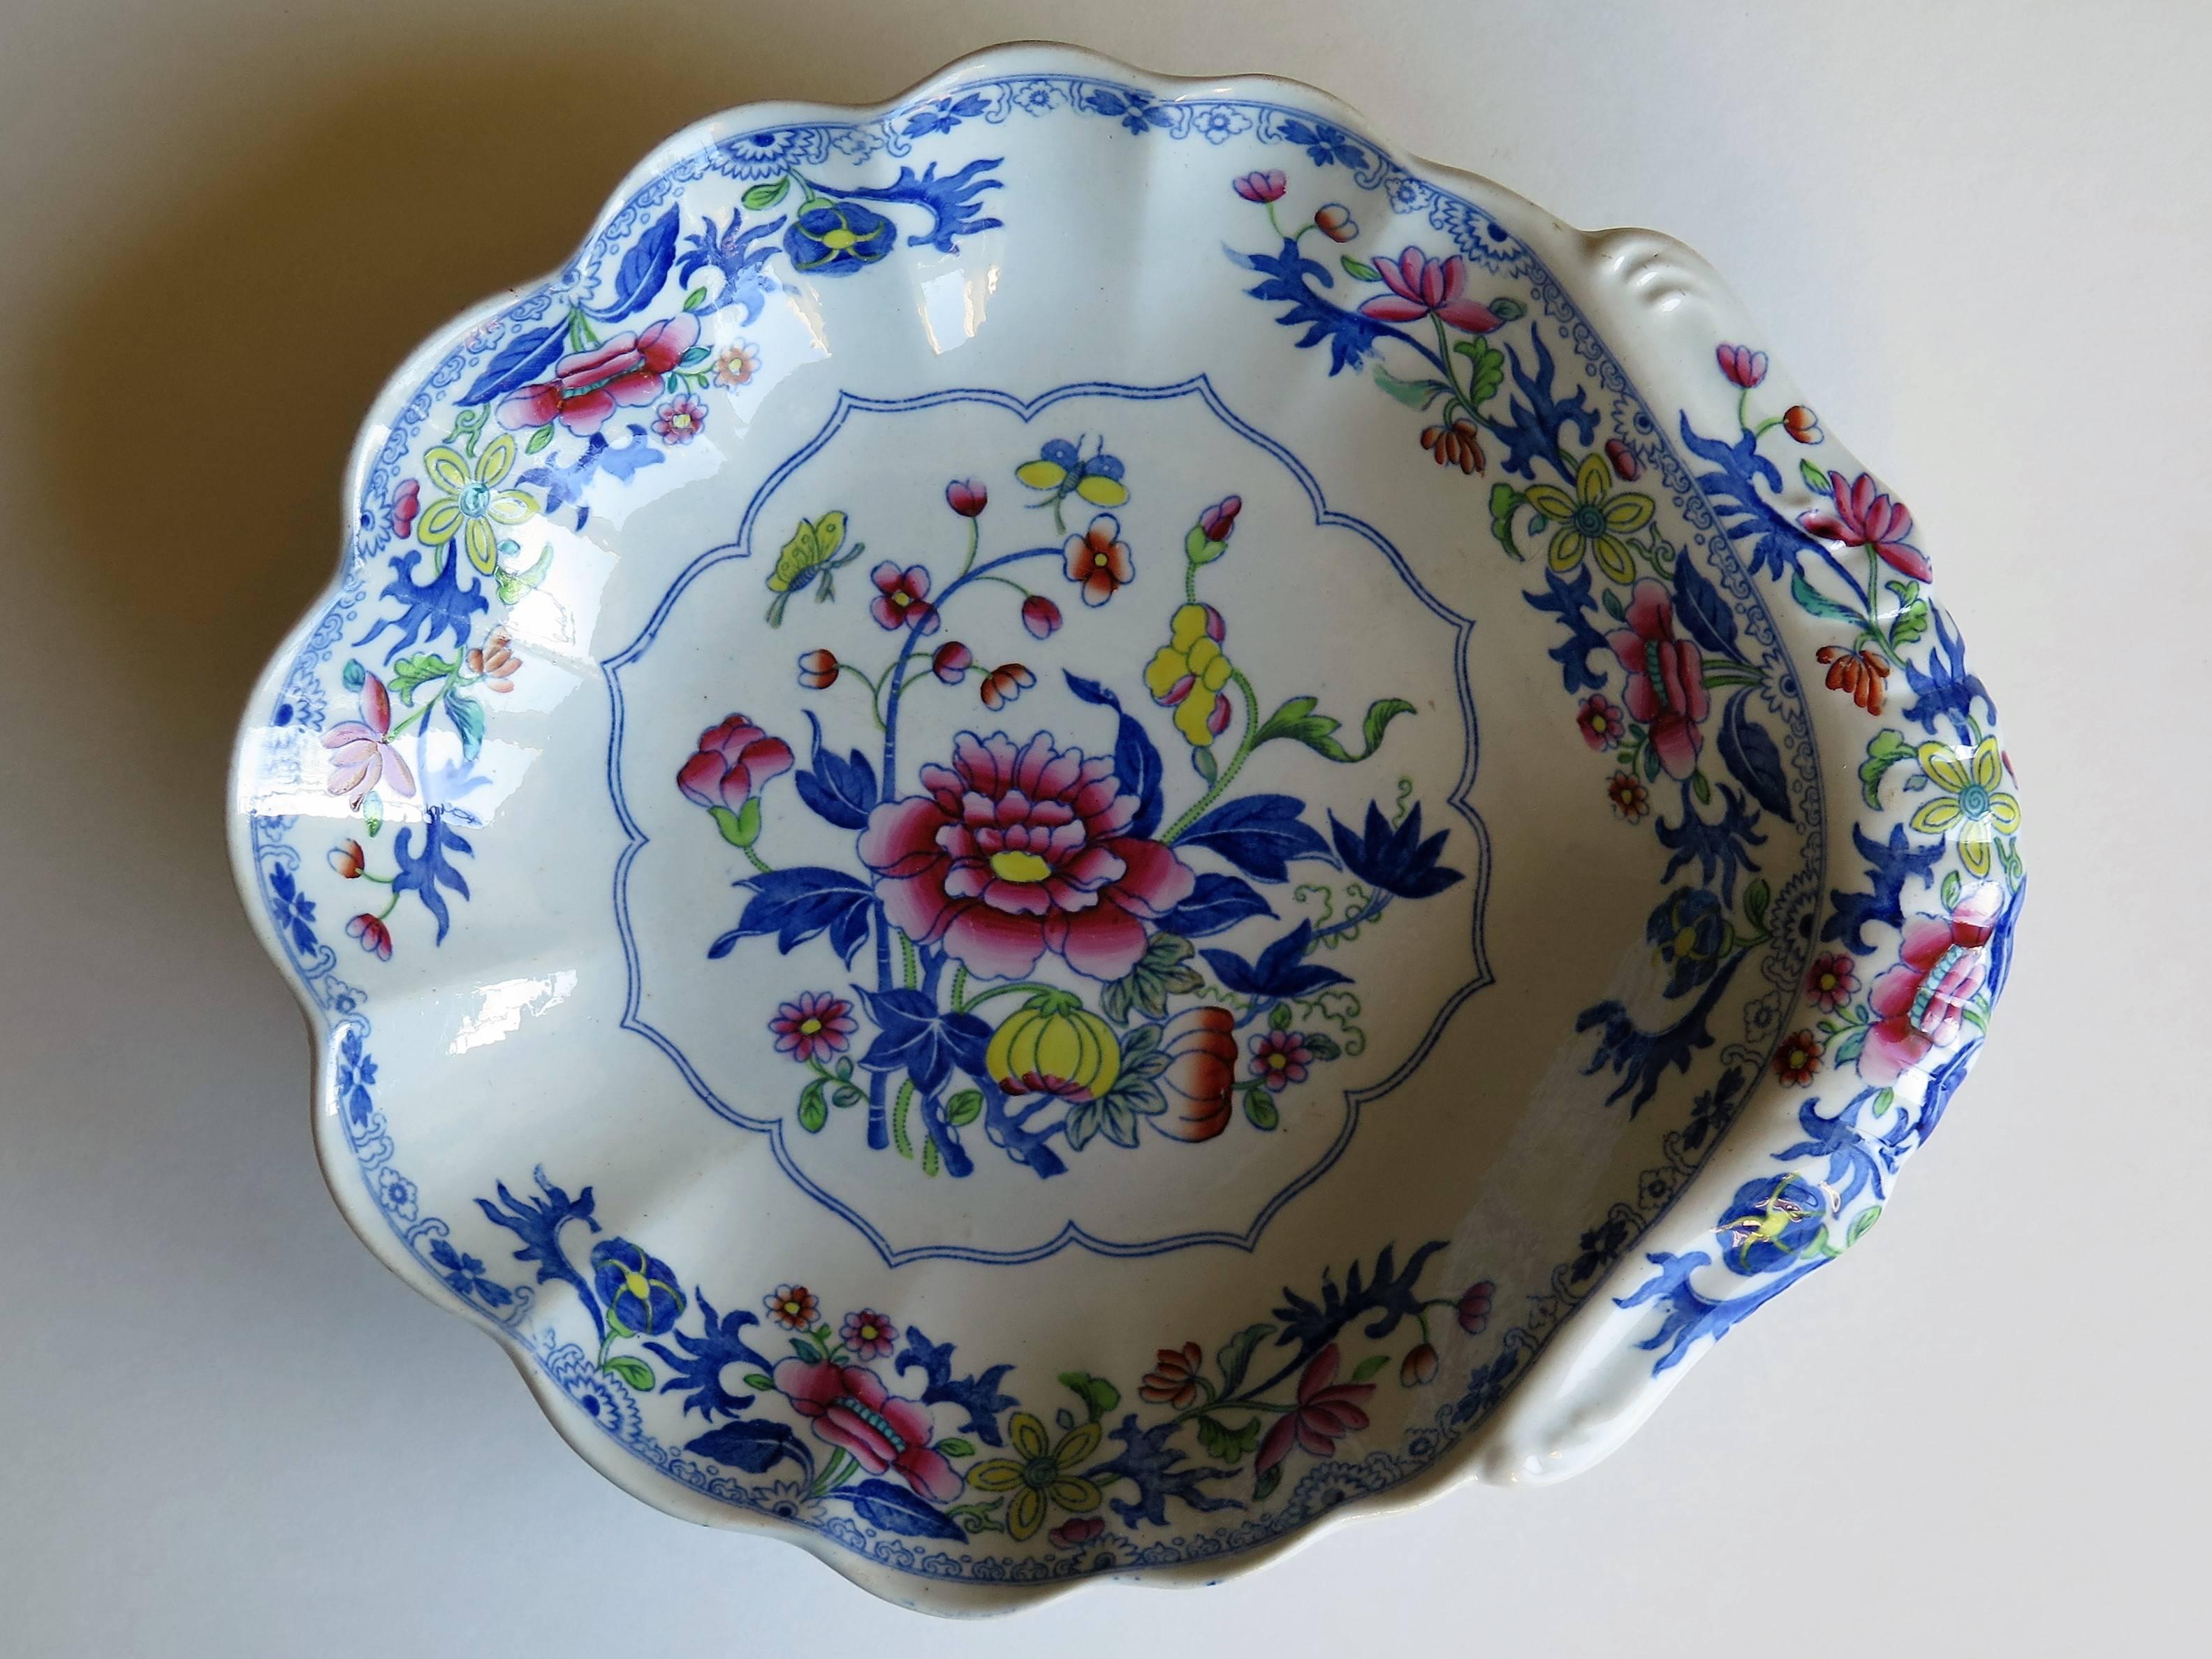 This is an early 19th century stone china (Ironstone pottery) desert dish with a fluted shell shape, produced by Spode and dating from the George 111rd period, circa 1820.

It is decorated in one of Spode's chinoiserie influenced floral patterns